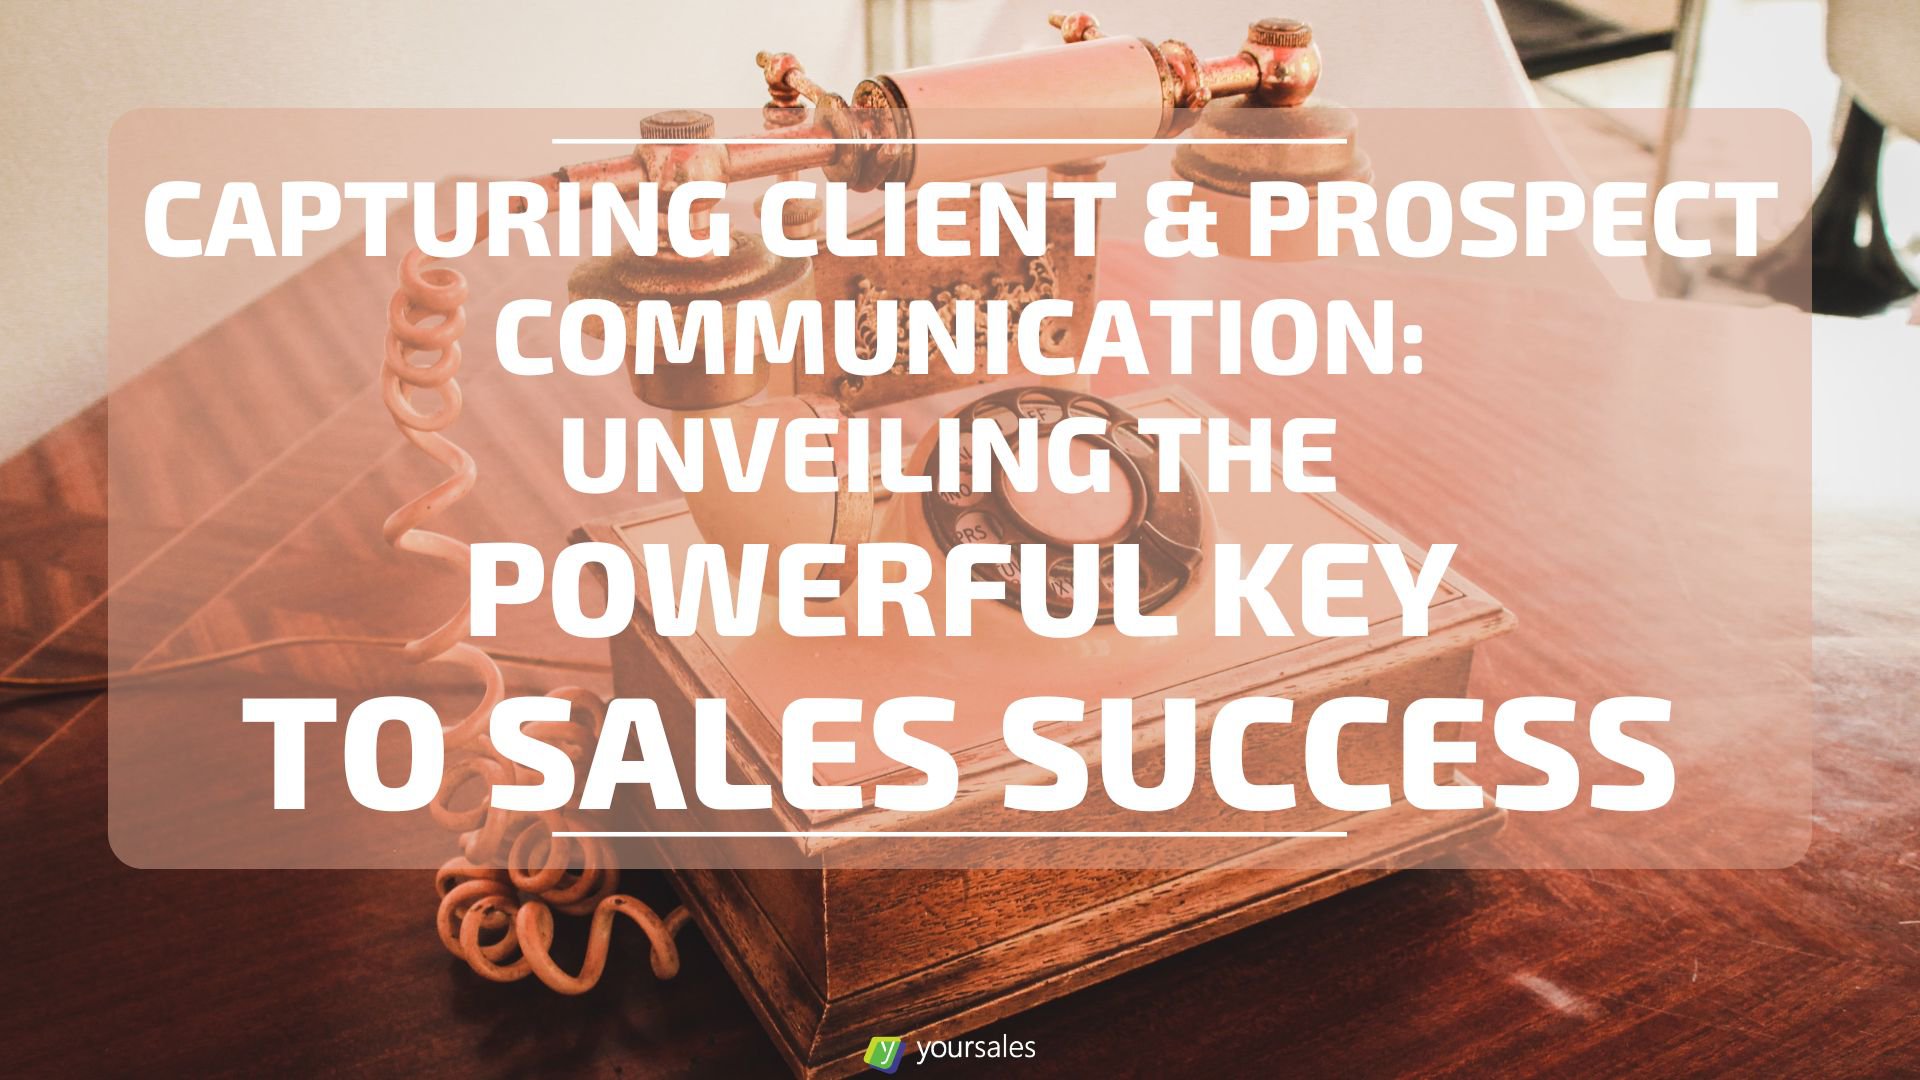 Featured image for “Capturing Client & Prospect Communication: Unveiling the Powerful Key to Sales Success”